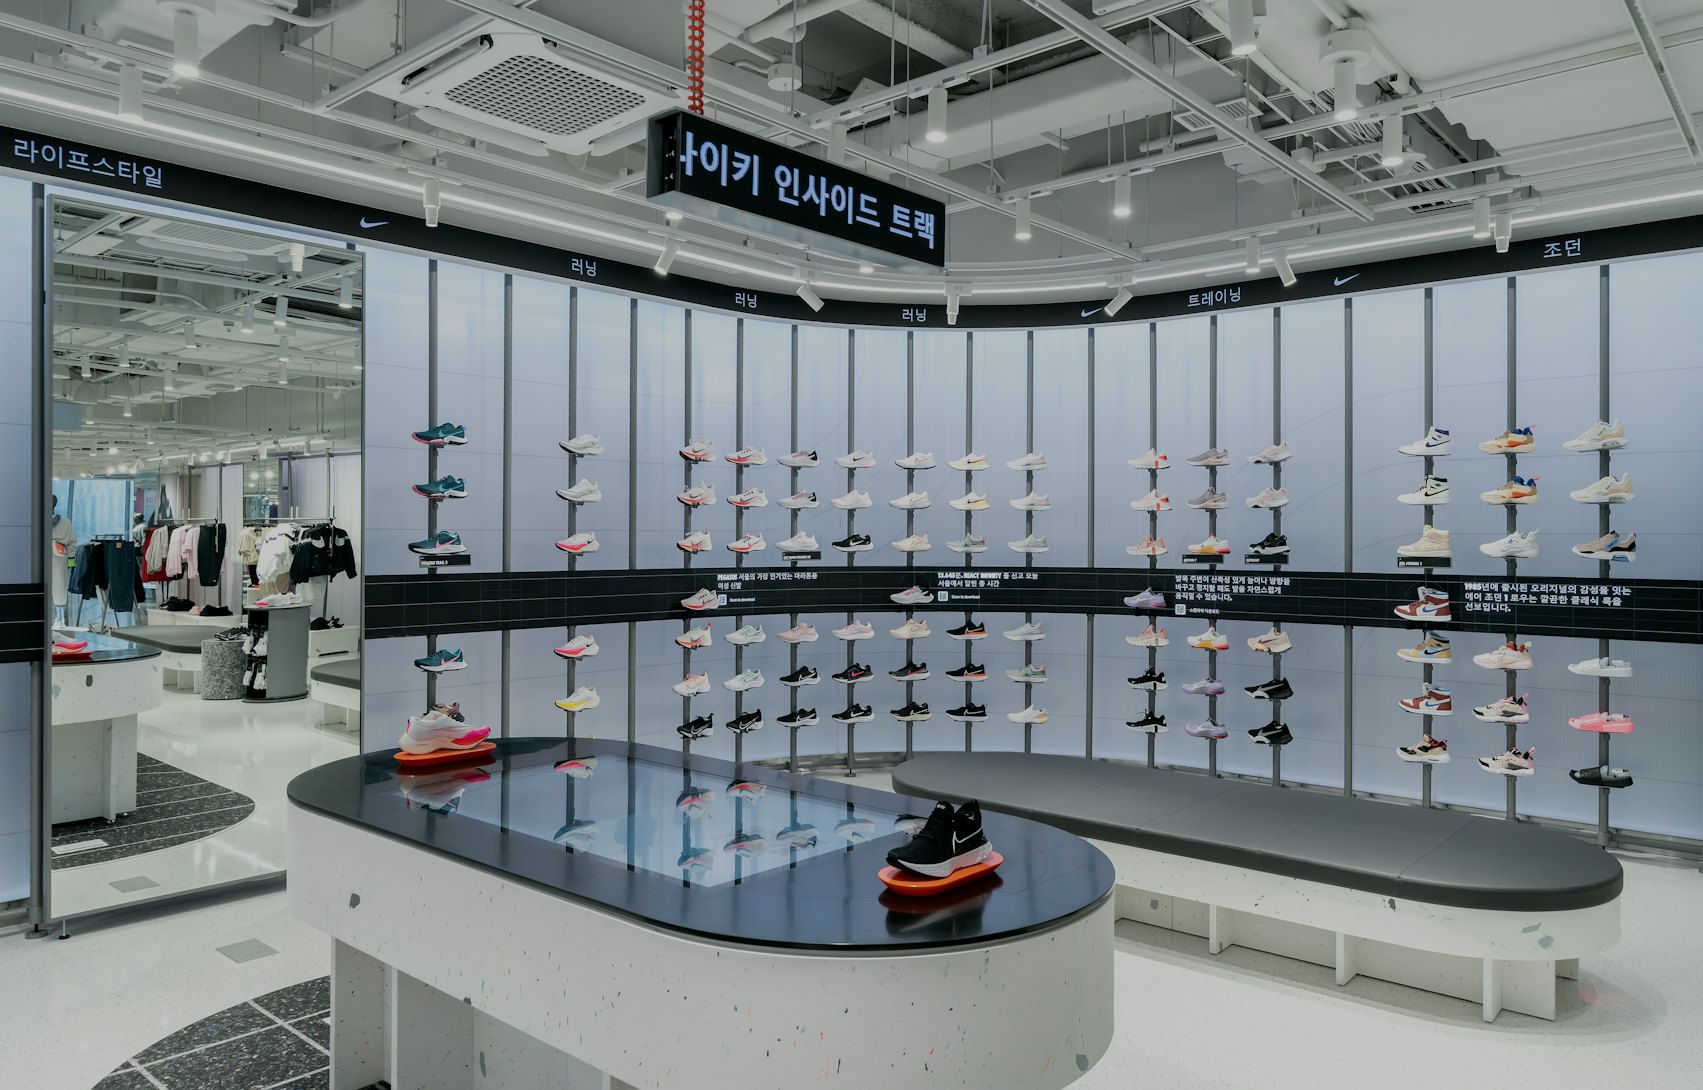 Vete Gepland heel veel Nike's new immersive 'Rise' store is a wild, high-tech shopping experience